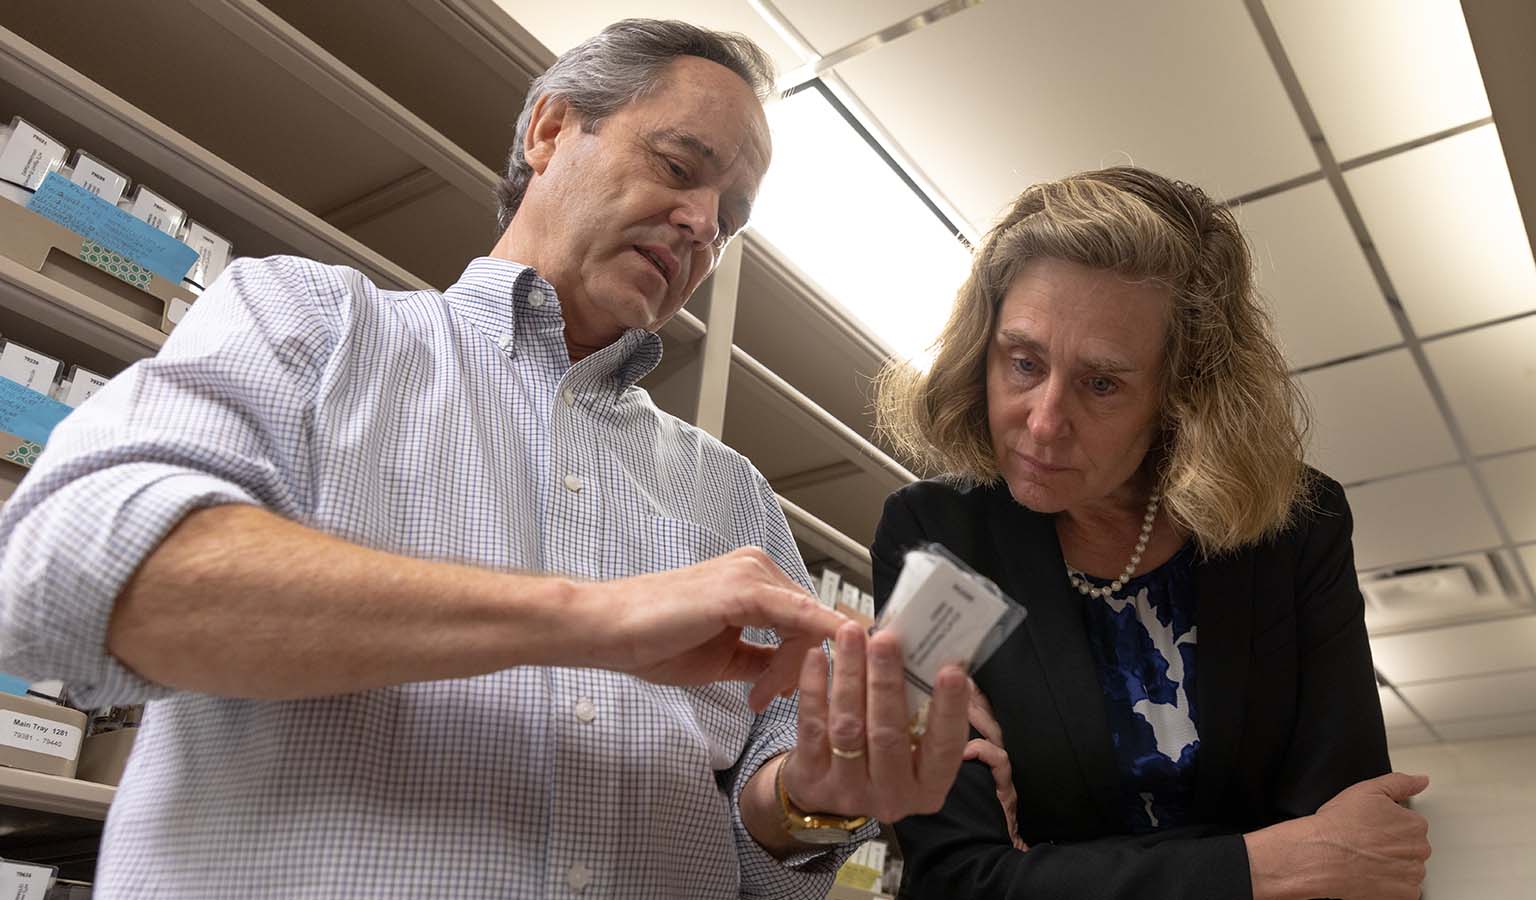 Kevin Cook (left) points at the label on a vial of one of the living fly cultures while talking with Pamela Whitten.